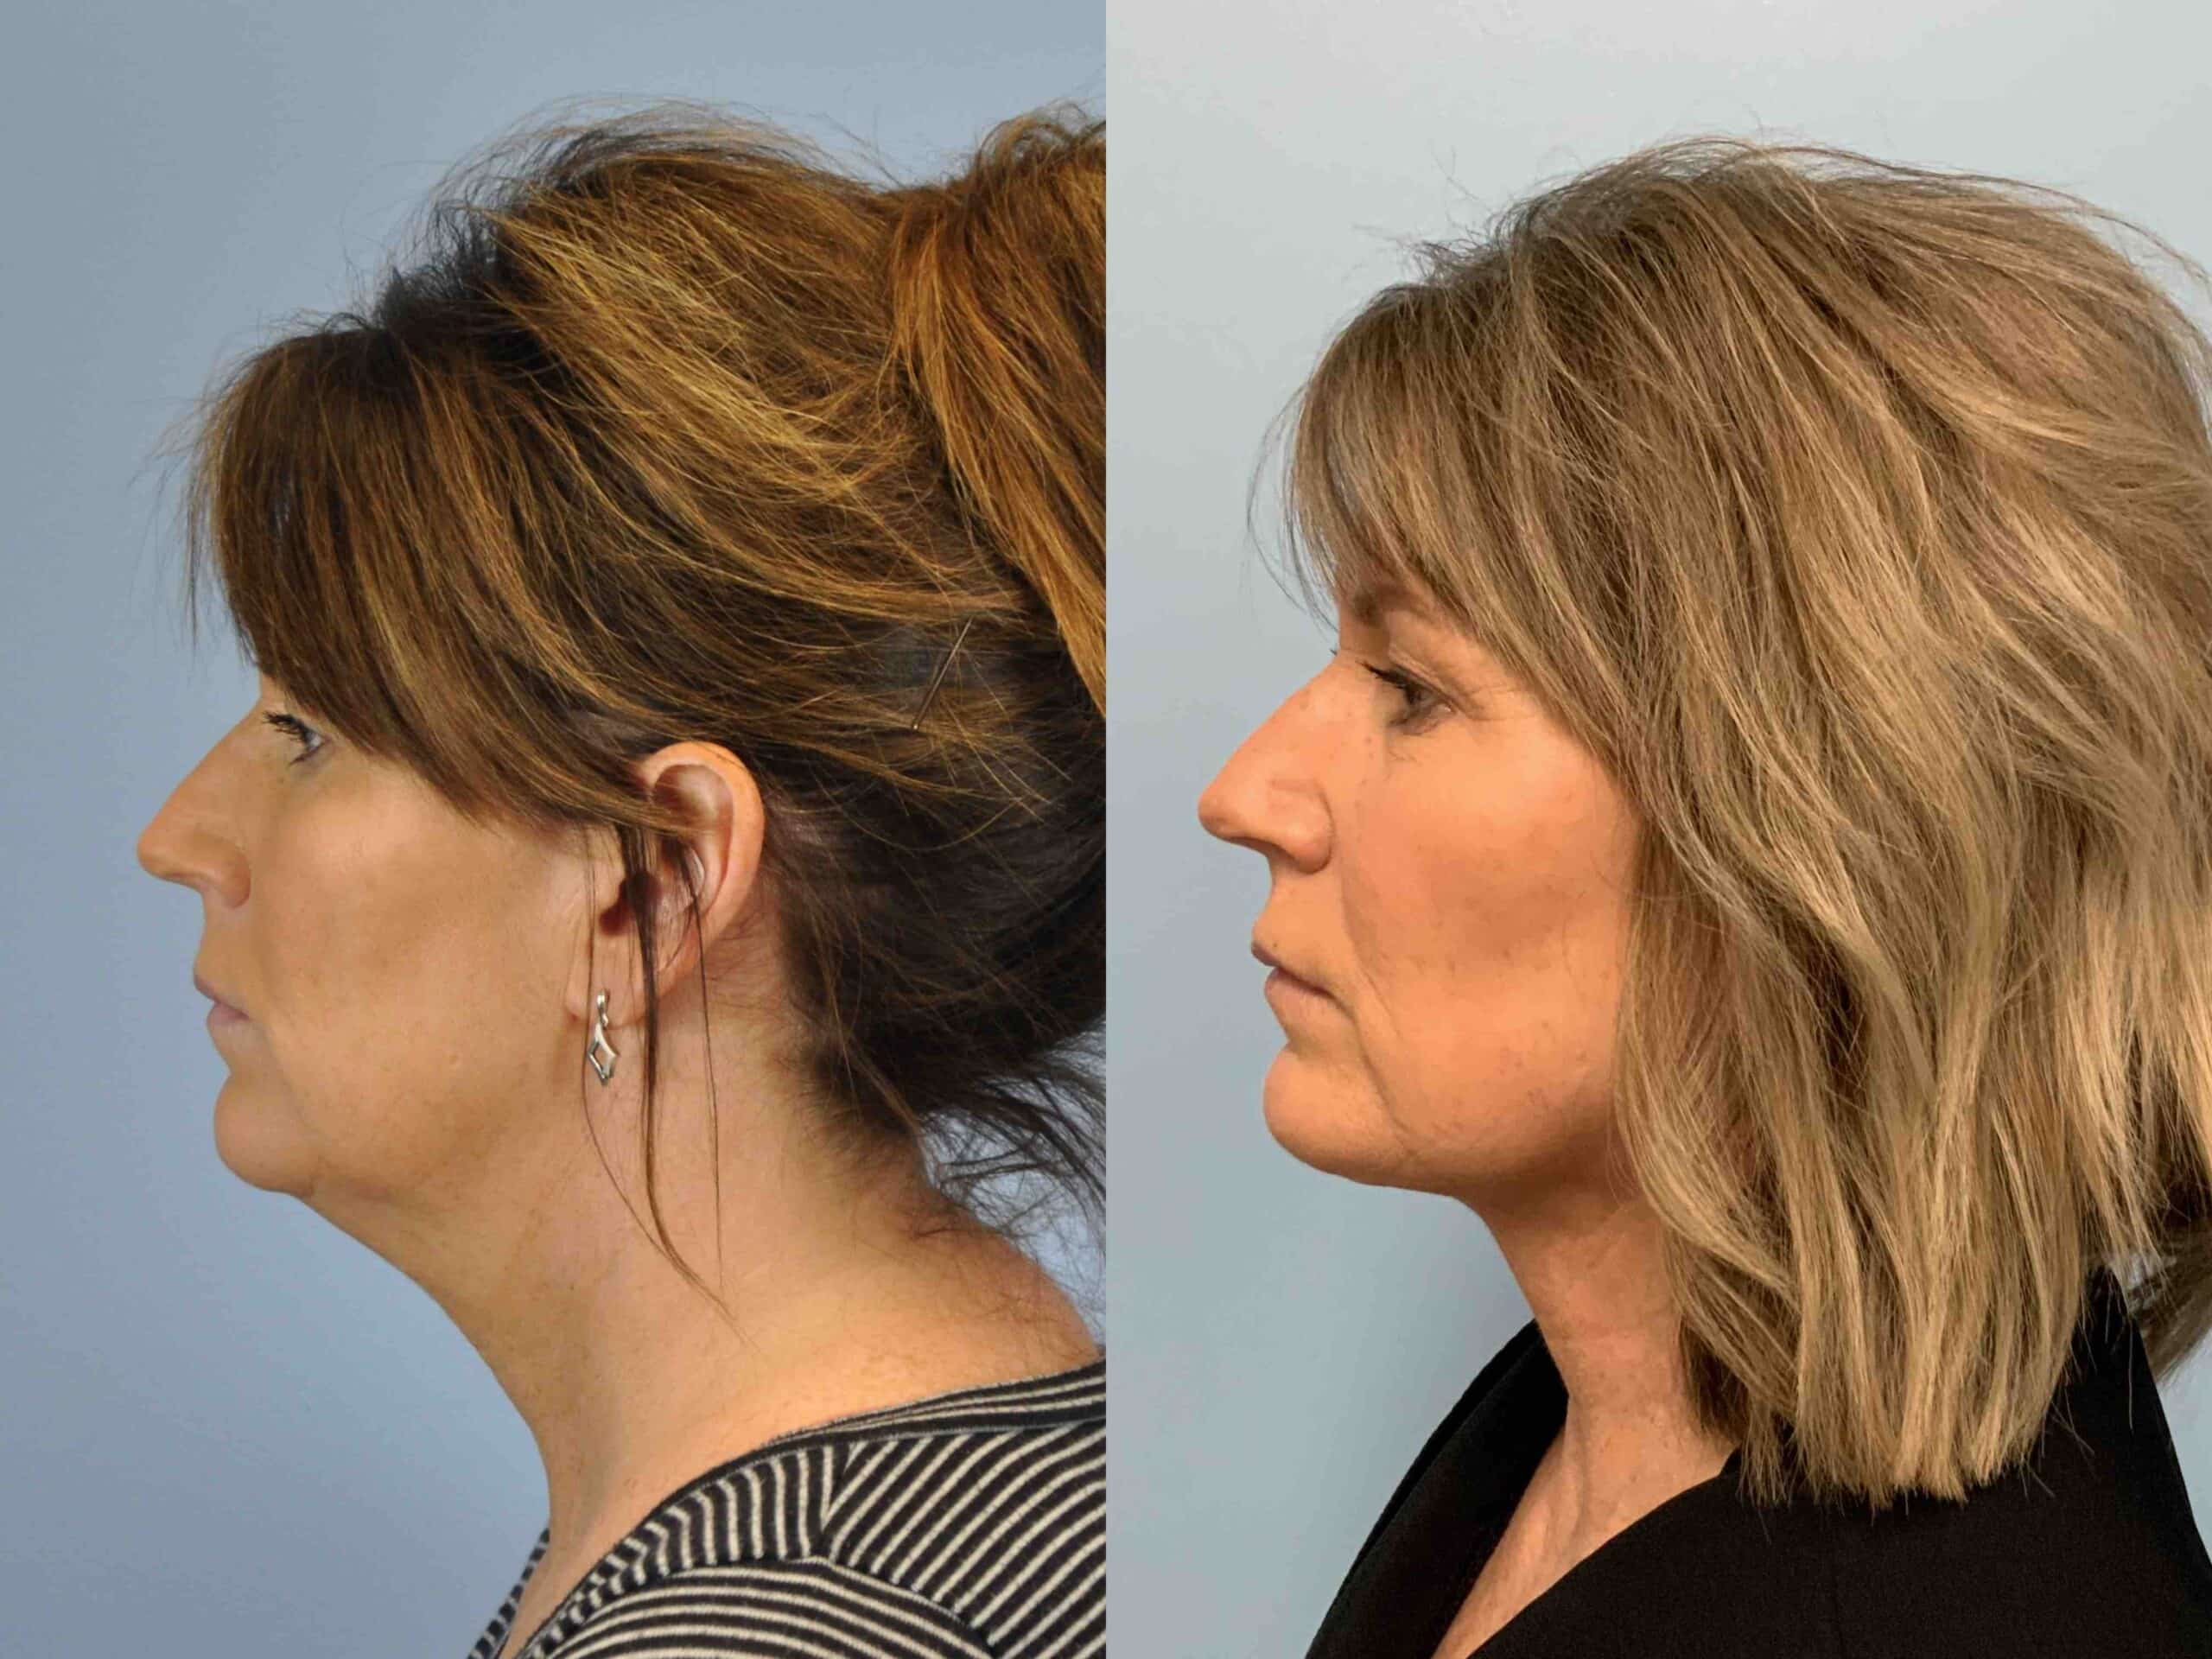 Before and after, patient 3 yr post op from Neck Lift, Renuvion Neck procedures performed by Dr. Paul Vanek